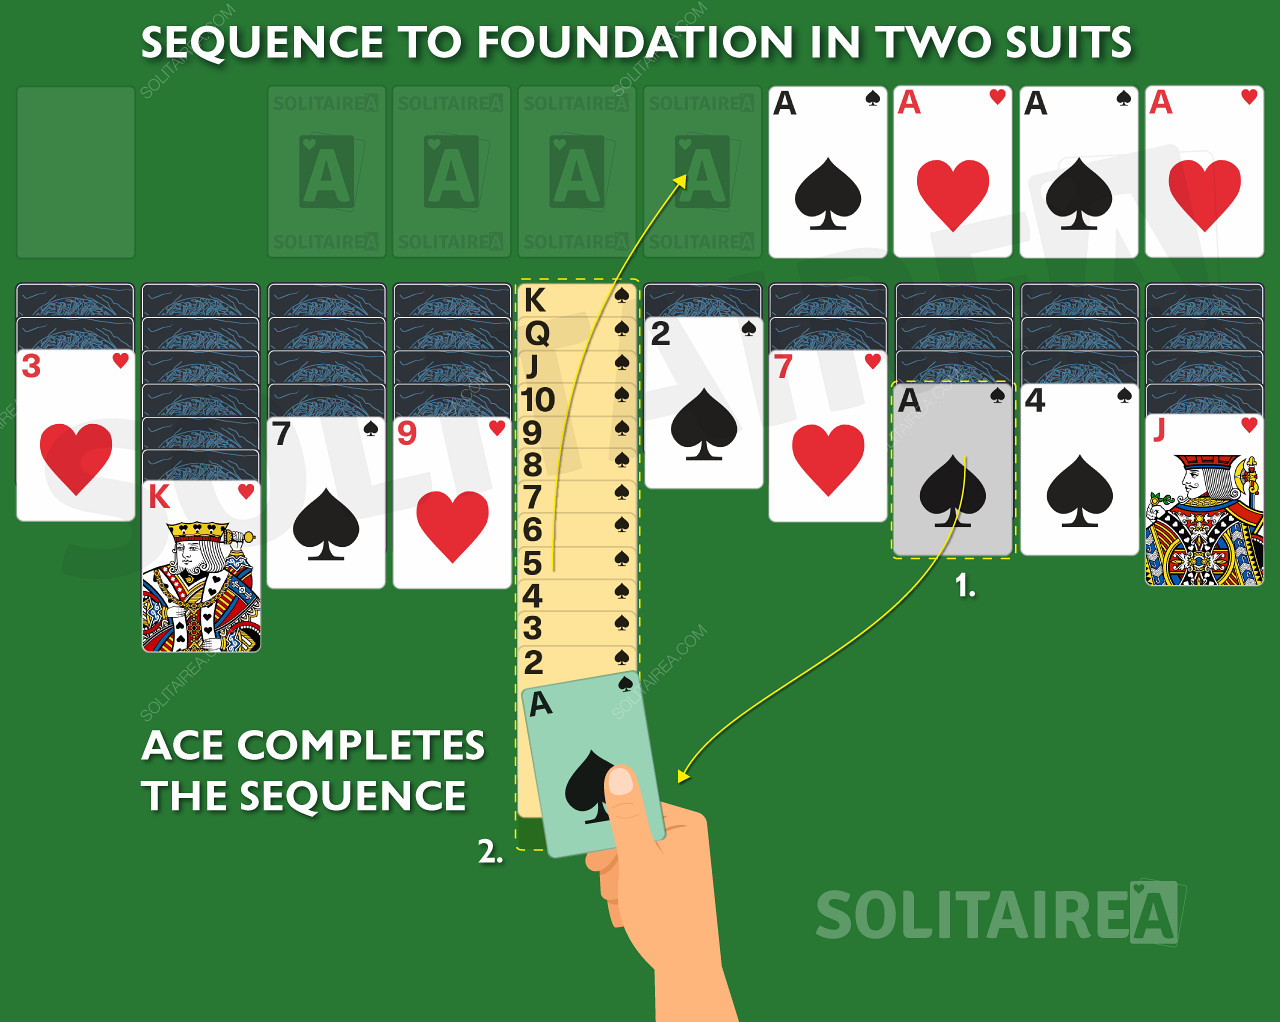 Move your ace as the final card to complete the sequence